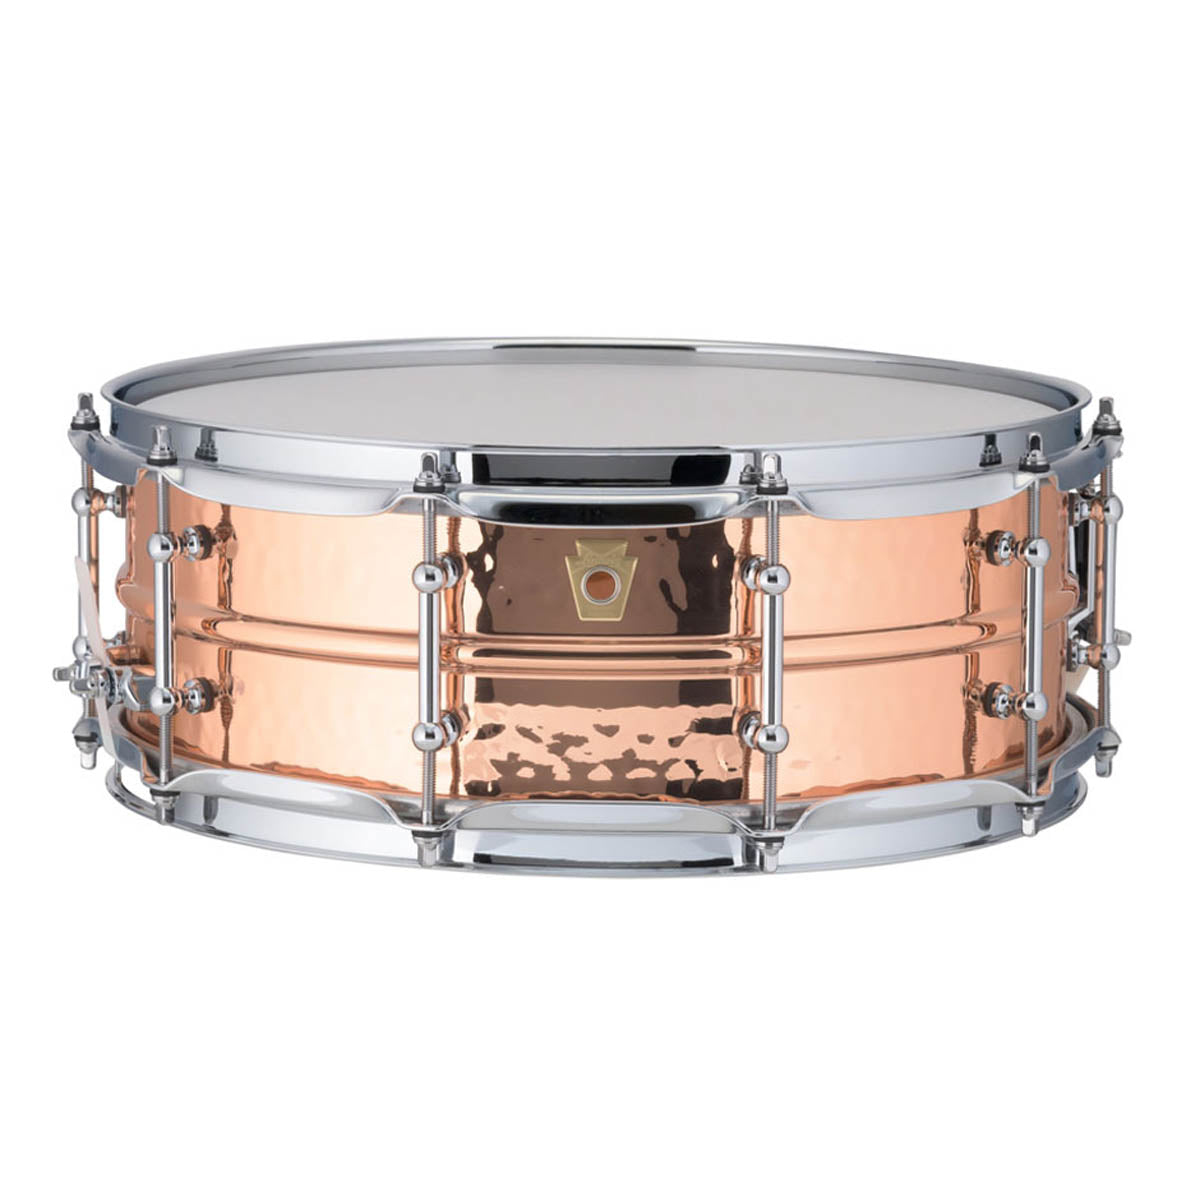 Ludwig CopperPhonic 14"x5" Hammered Snare Drum